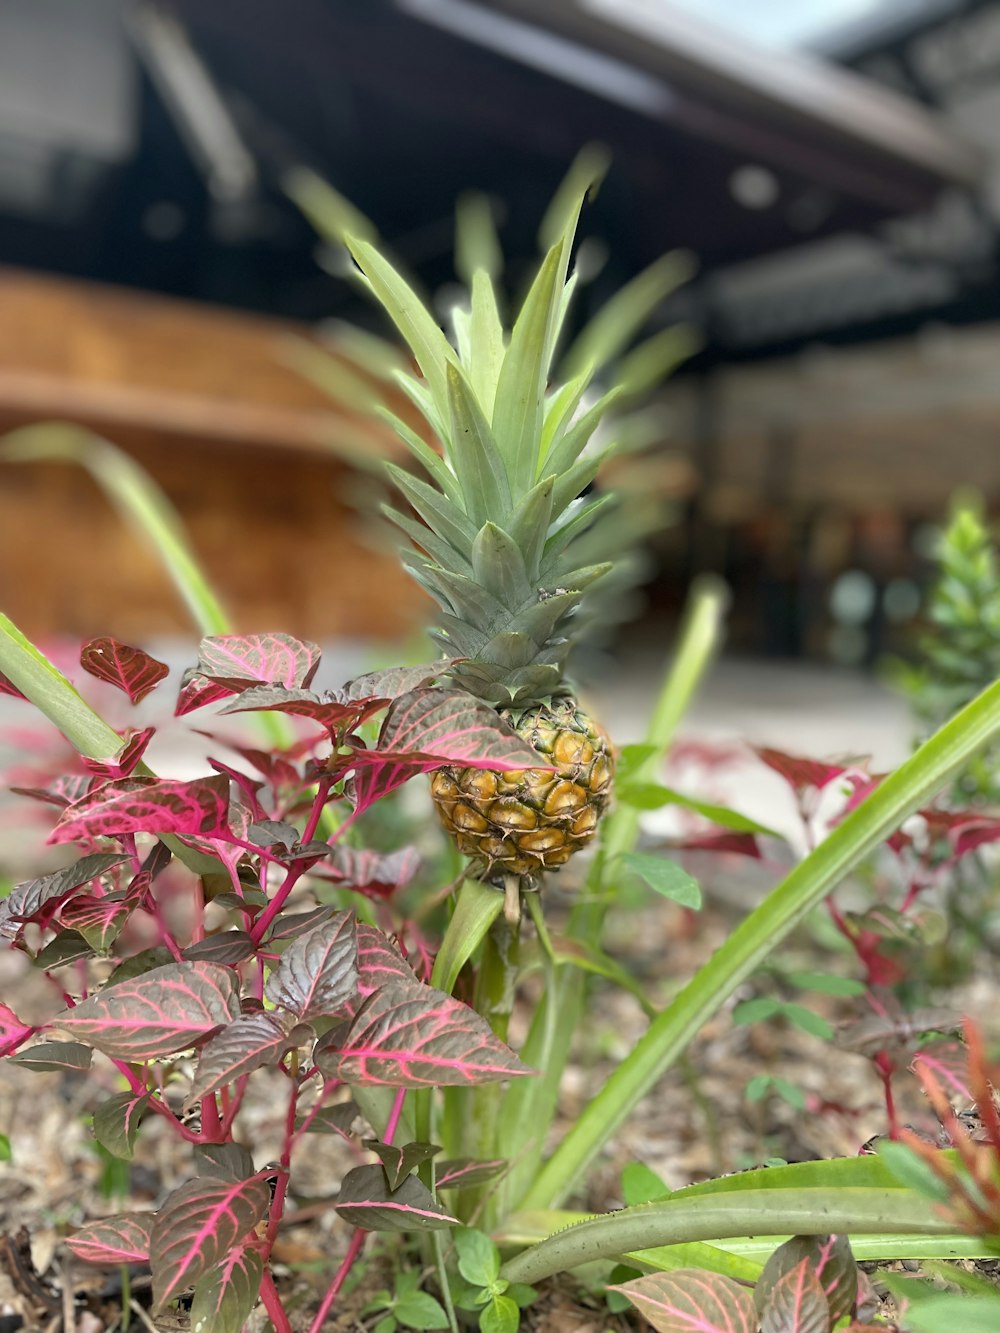 a pineapple plant with red leaves and green leaves